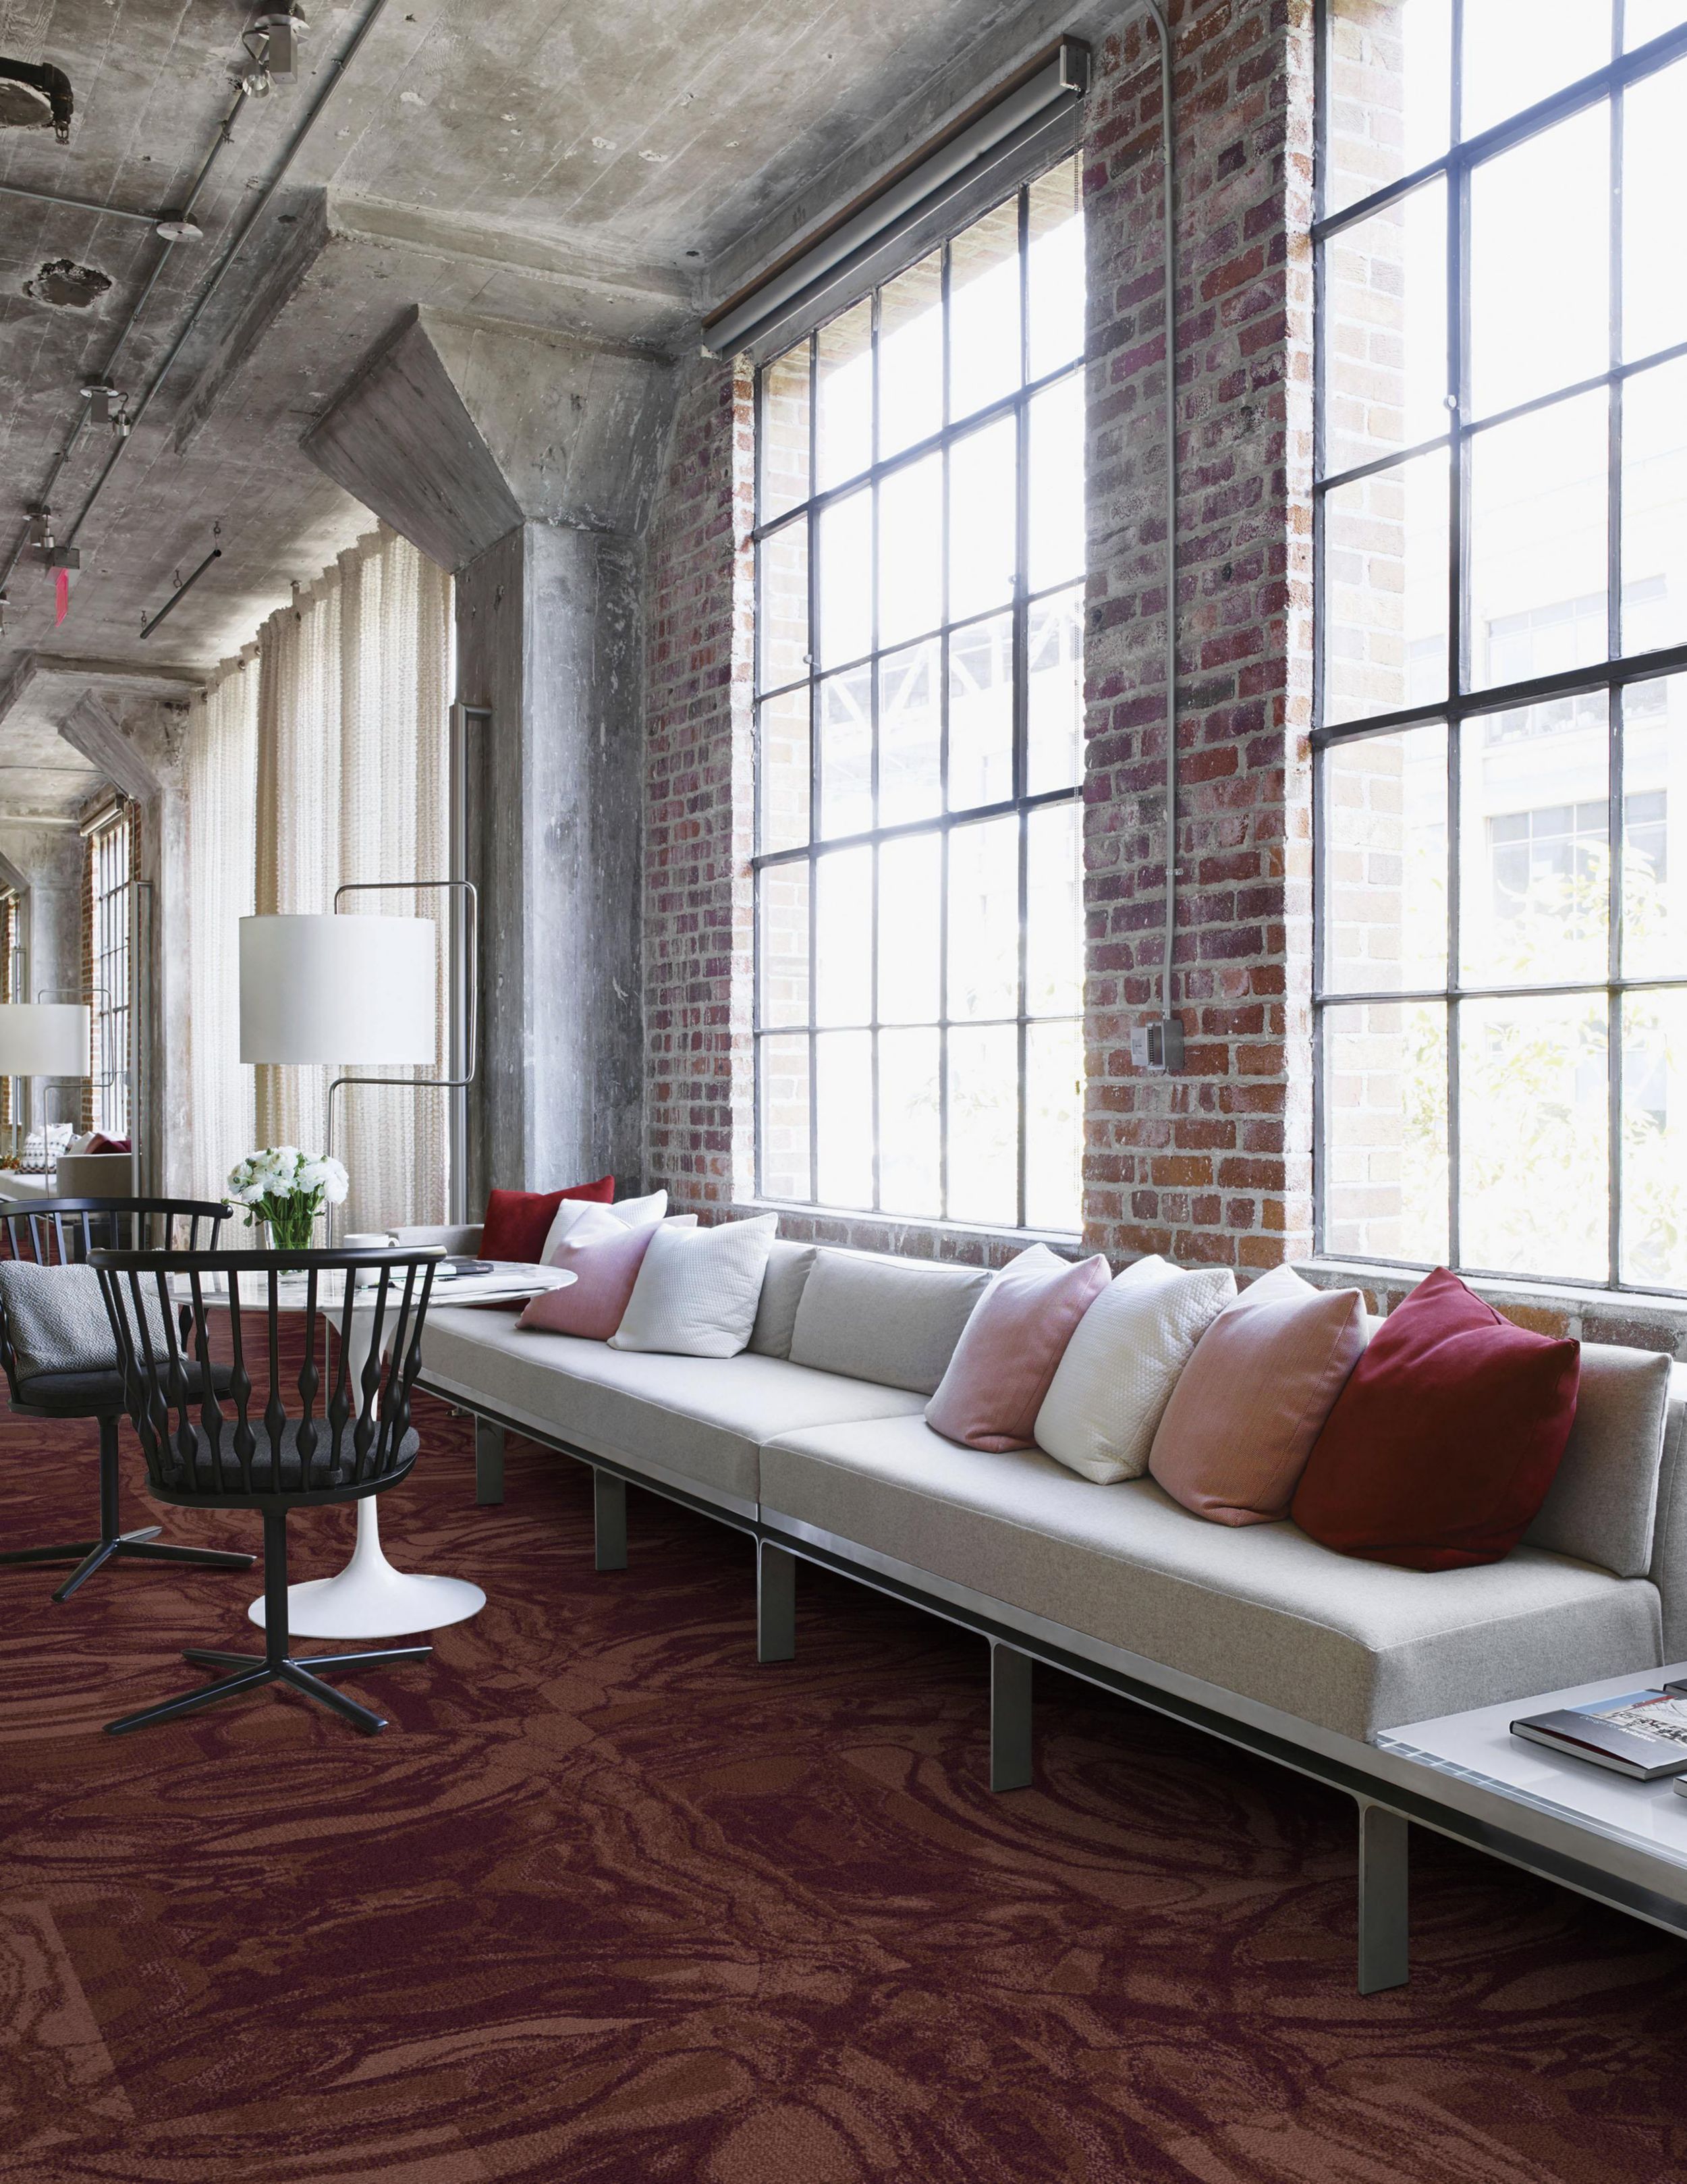 Interface Head Over Heels M1047 Carpet Tile in hotel lobby with exposed brick and floor to ceiling windows image number 5